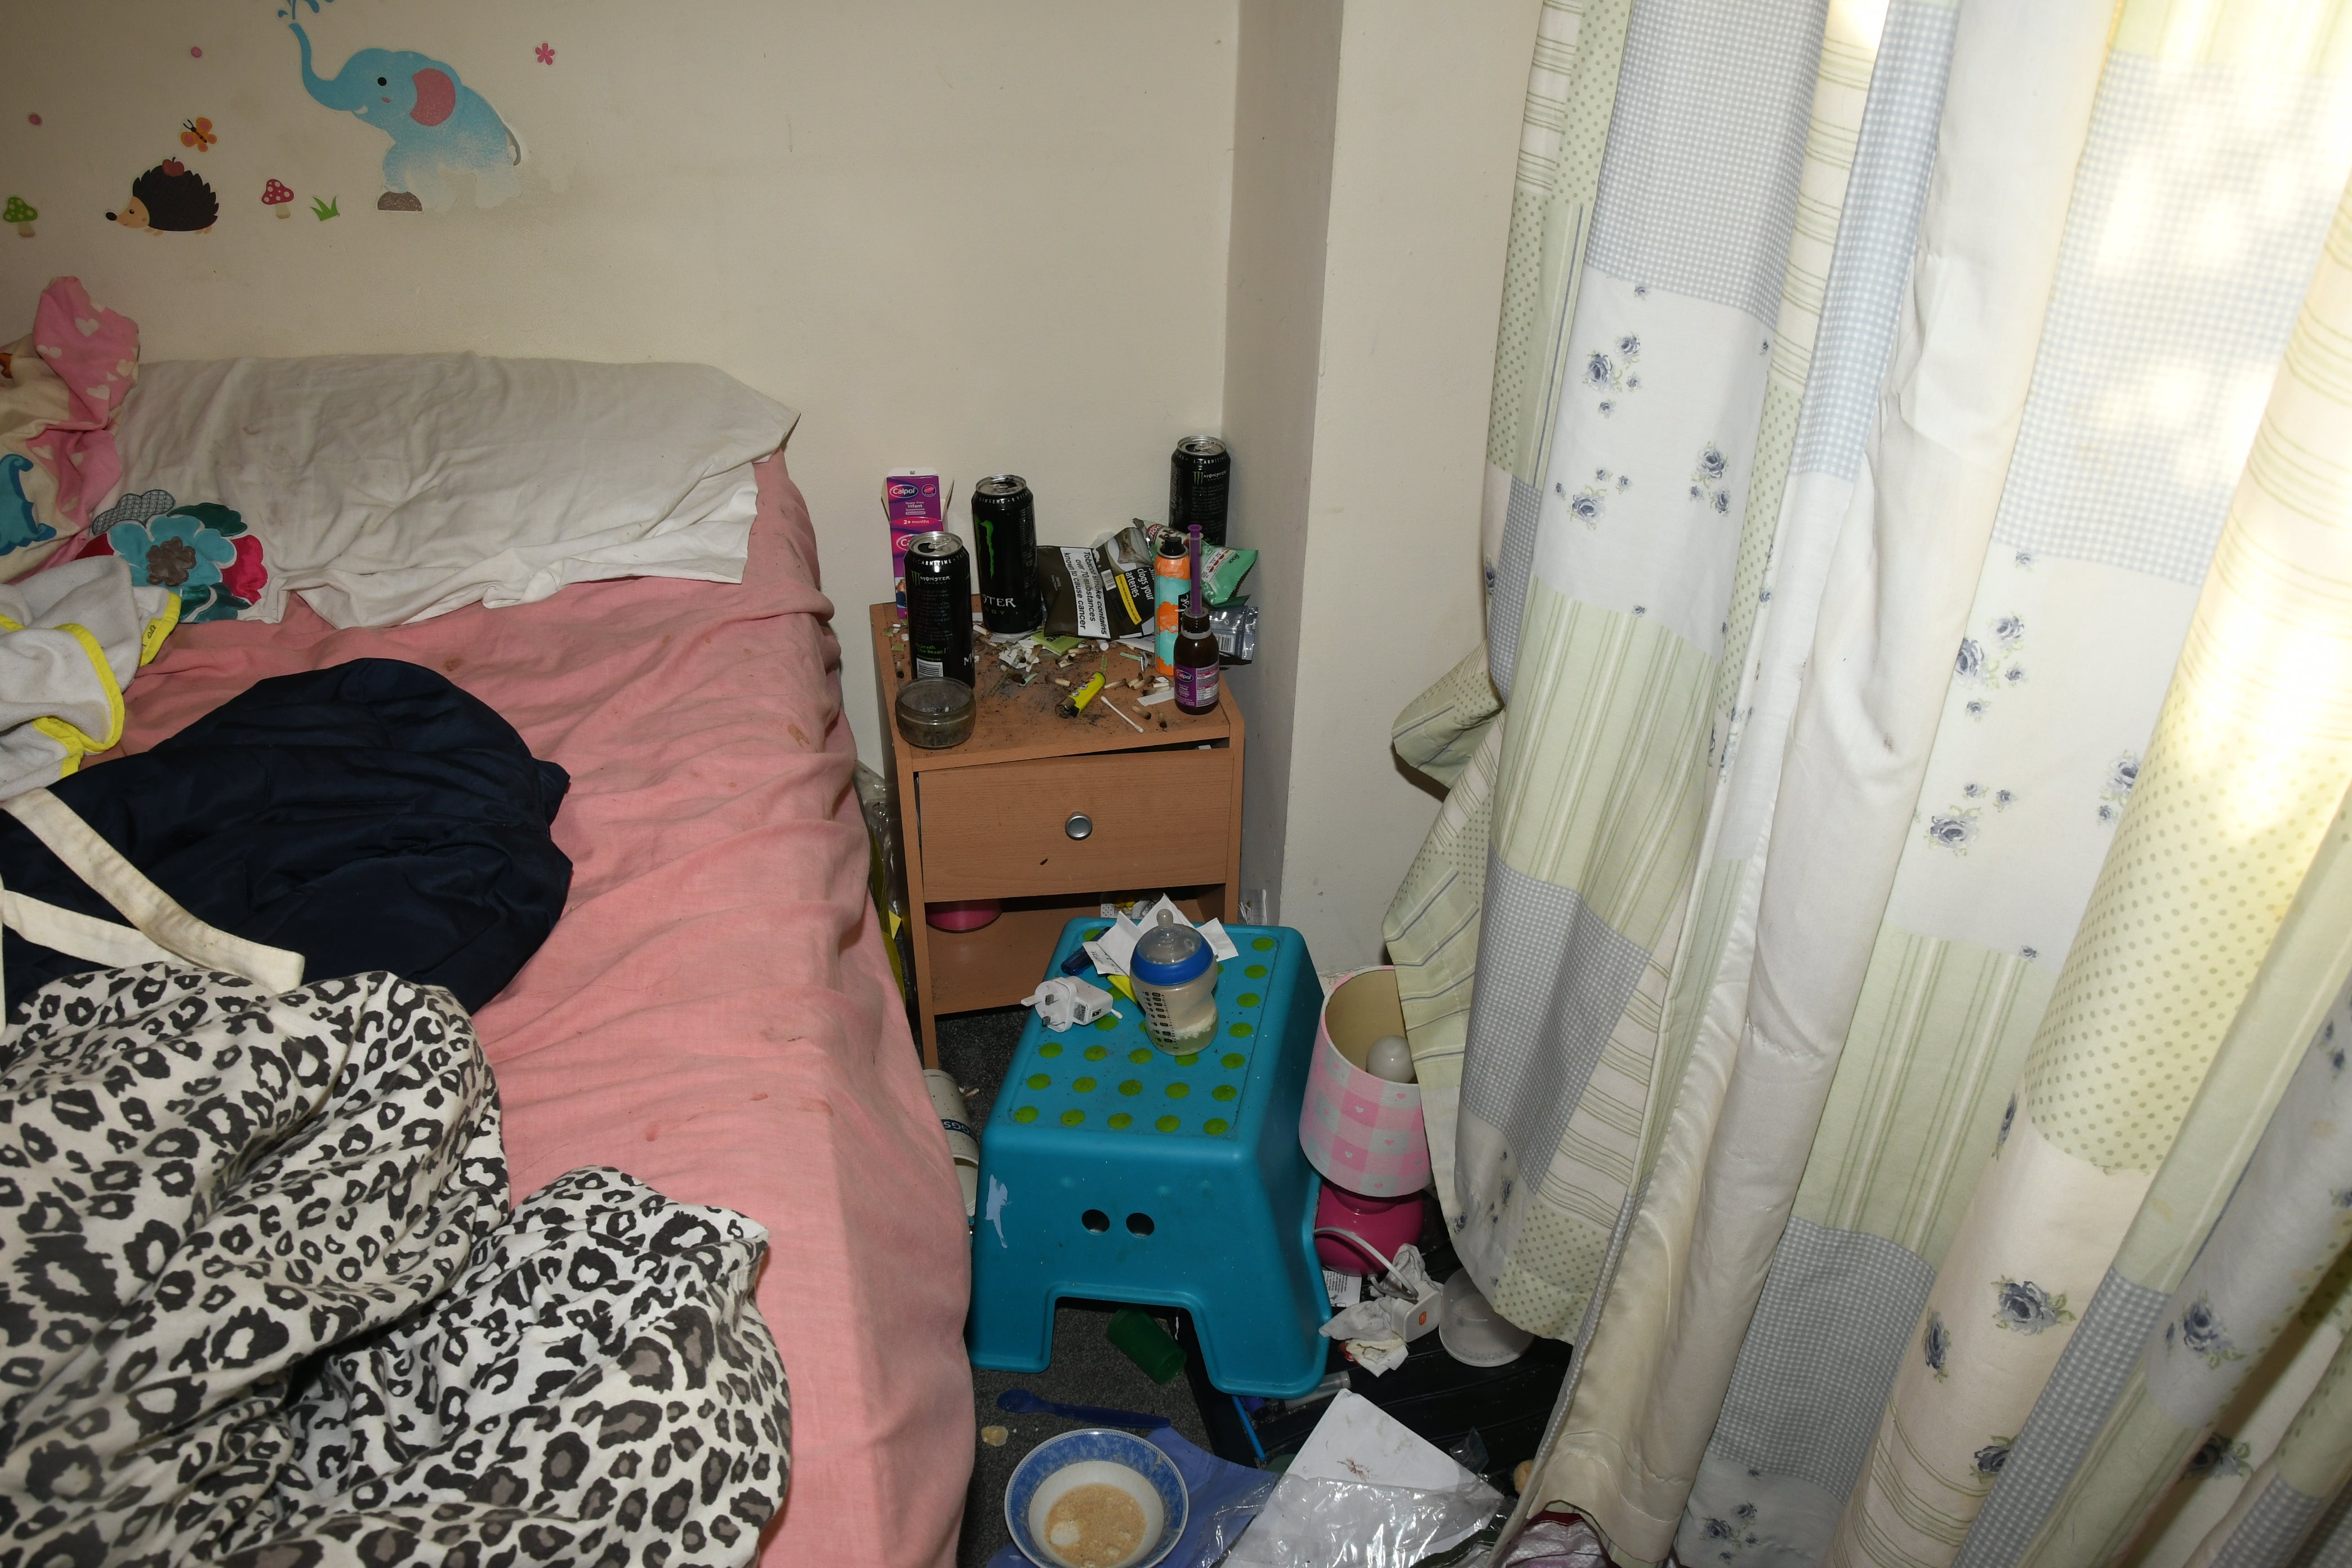 Blood, faeces and saliva were seen on Finley’s cot and on clothes alongside bottles of gone-off milk and signs of cannabis use.